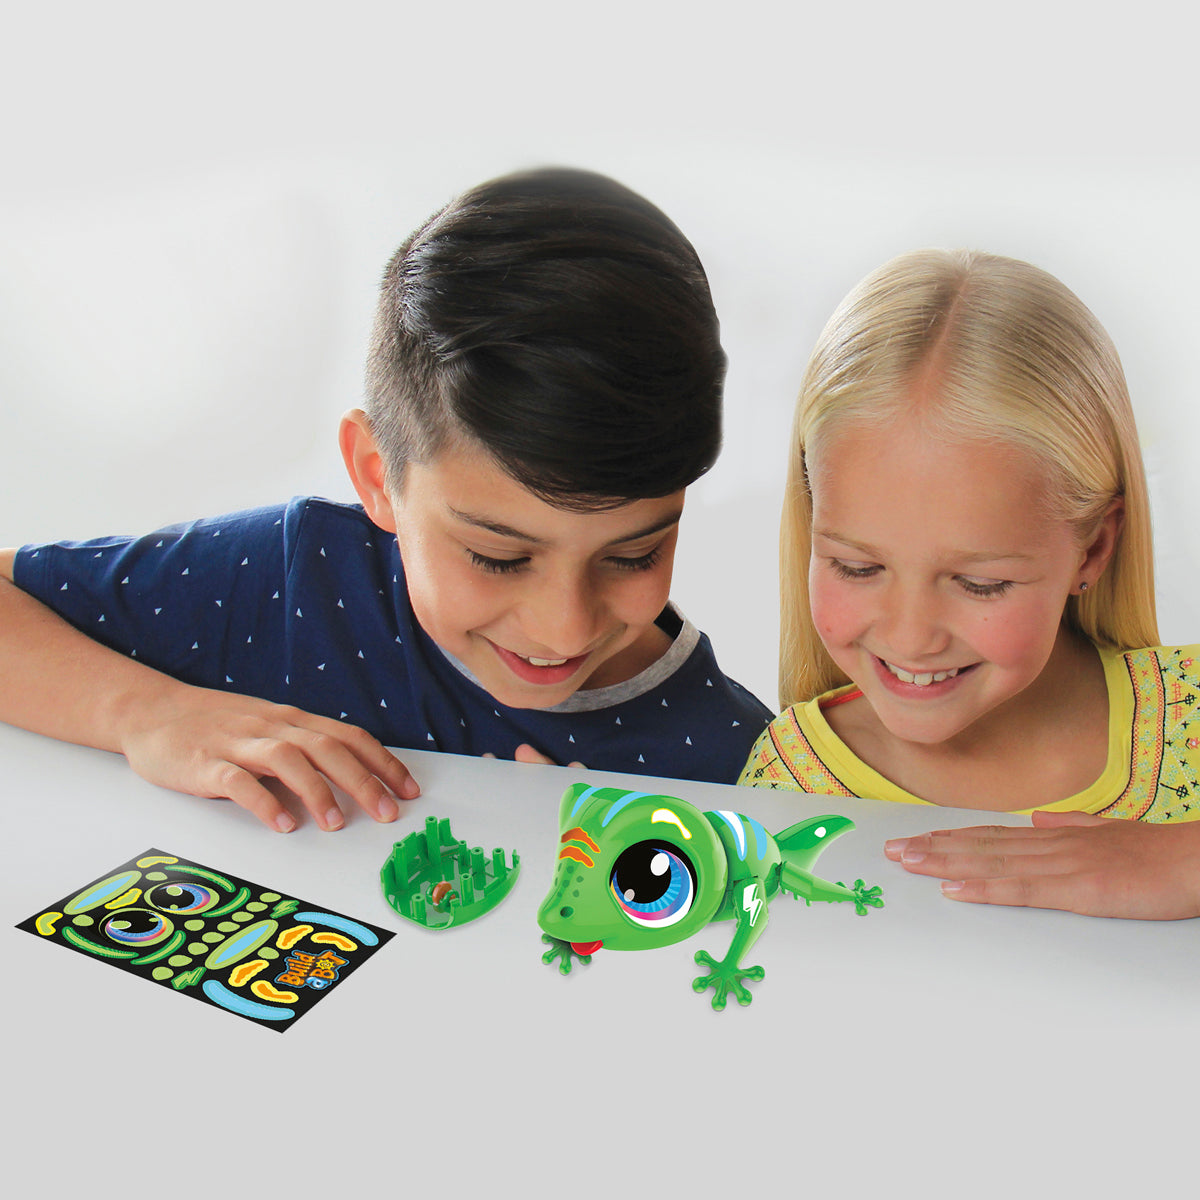 Build A Bot Motorised Glow Gecko Buildable Electronic Pet